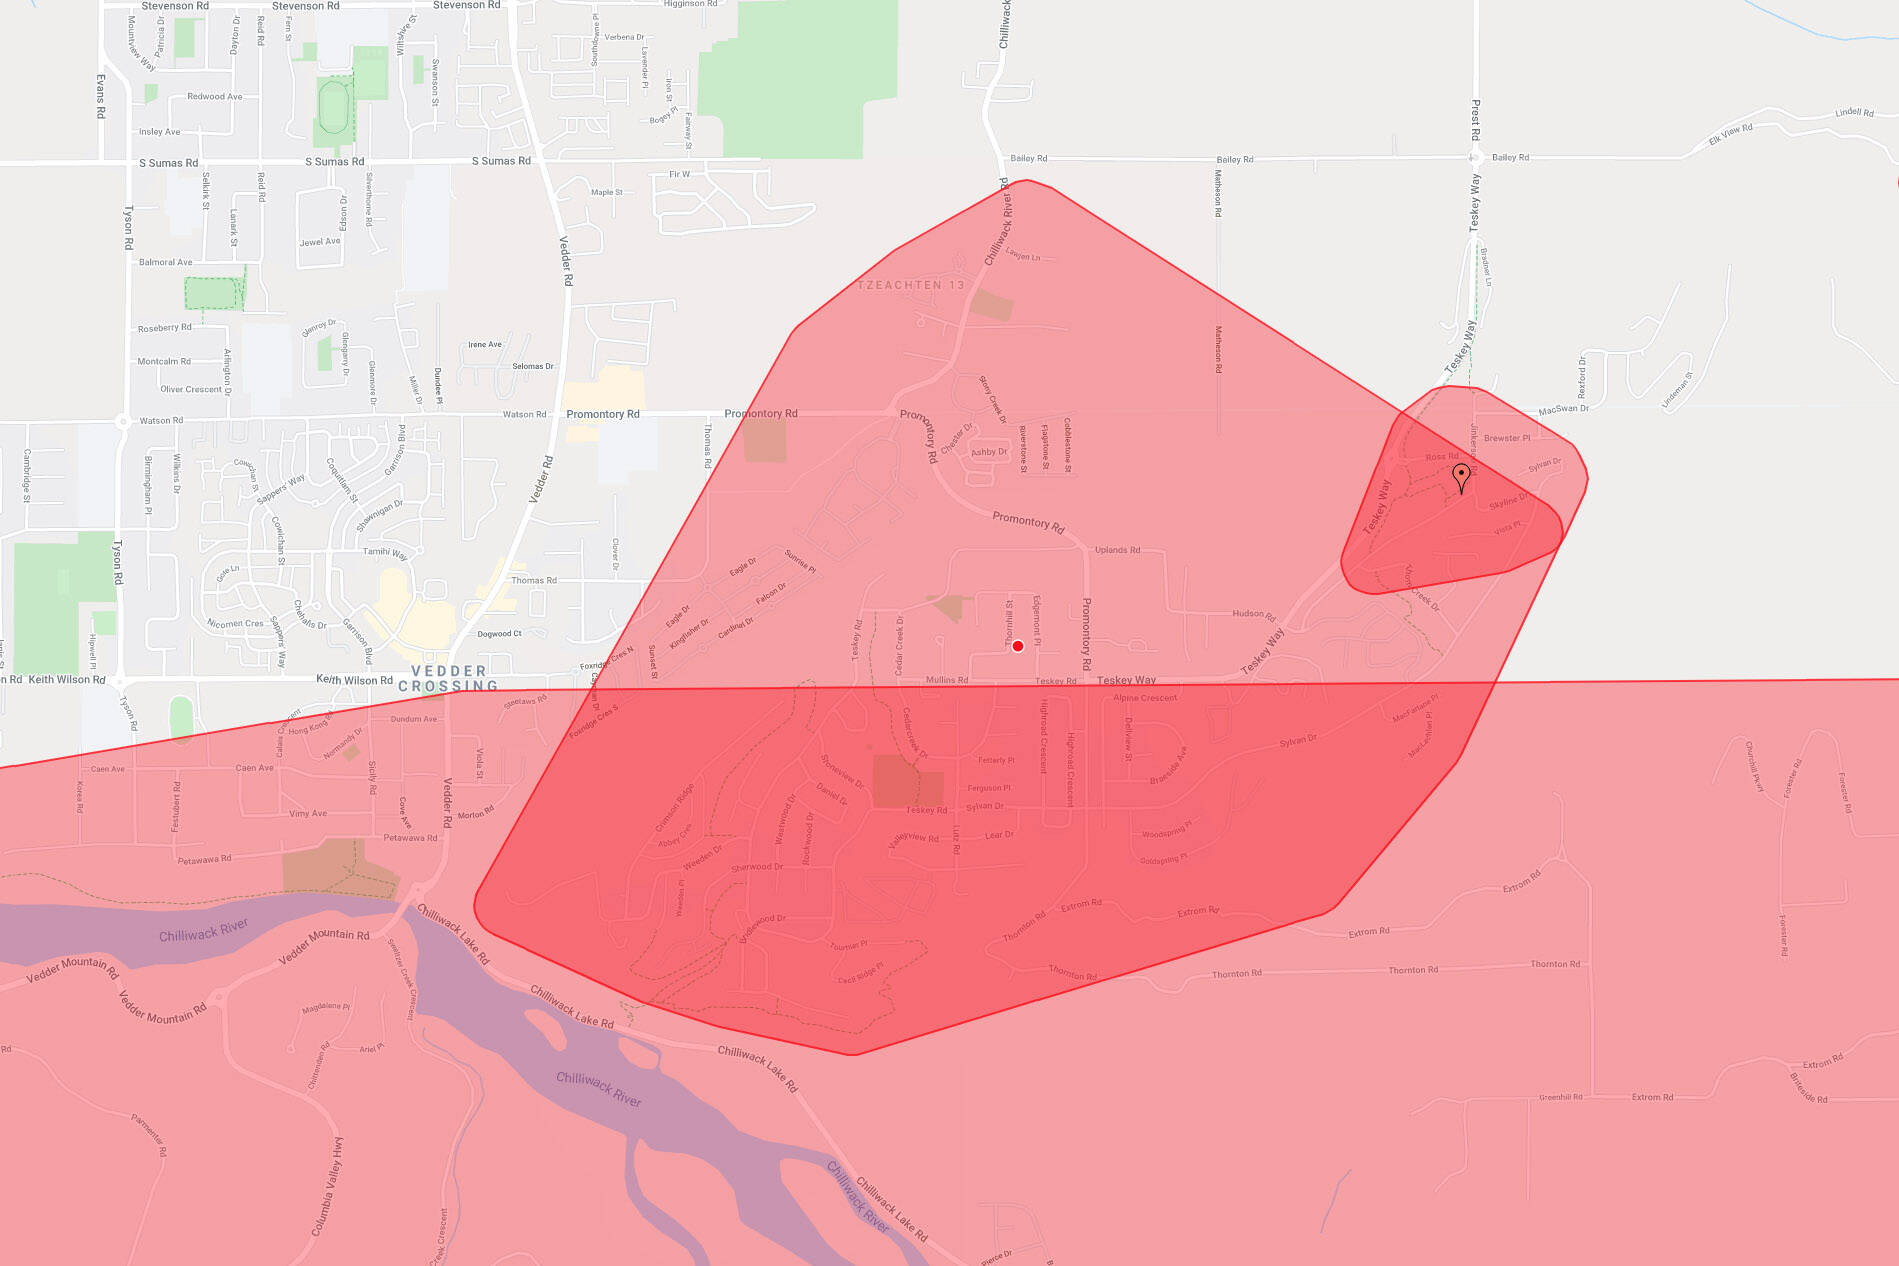 More than 10,000 BC Hydro customers were without power Friday, Jan. 7, 2022. (BC Hydro)